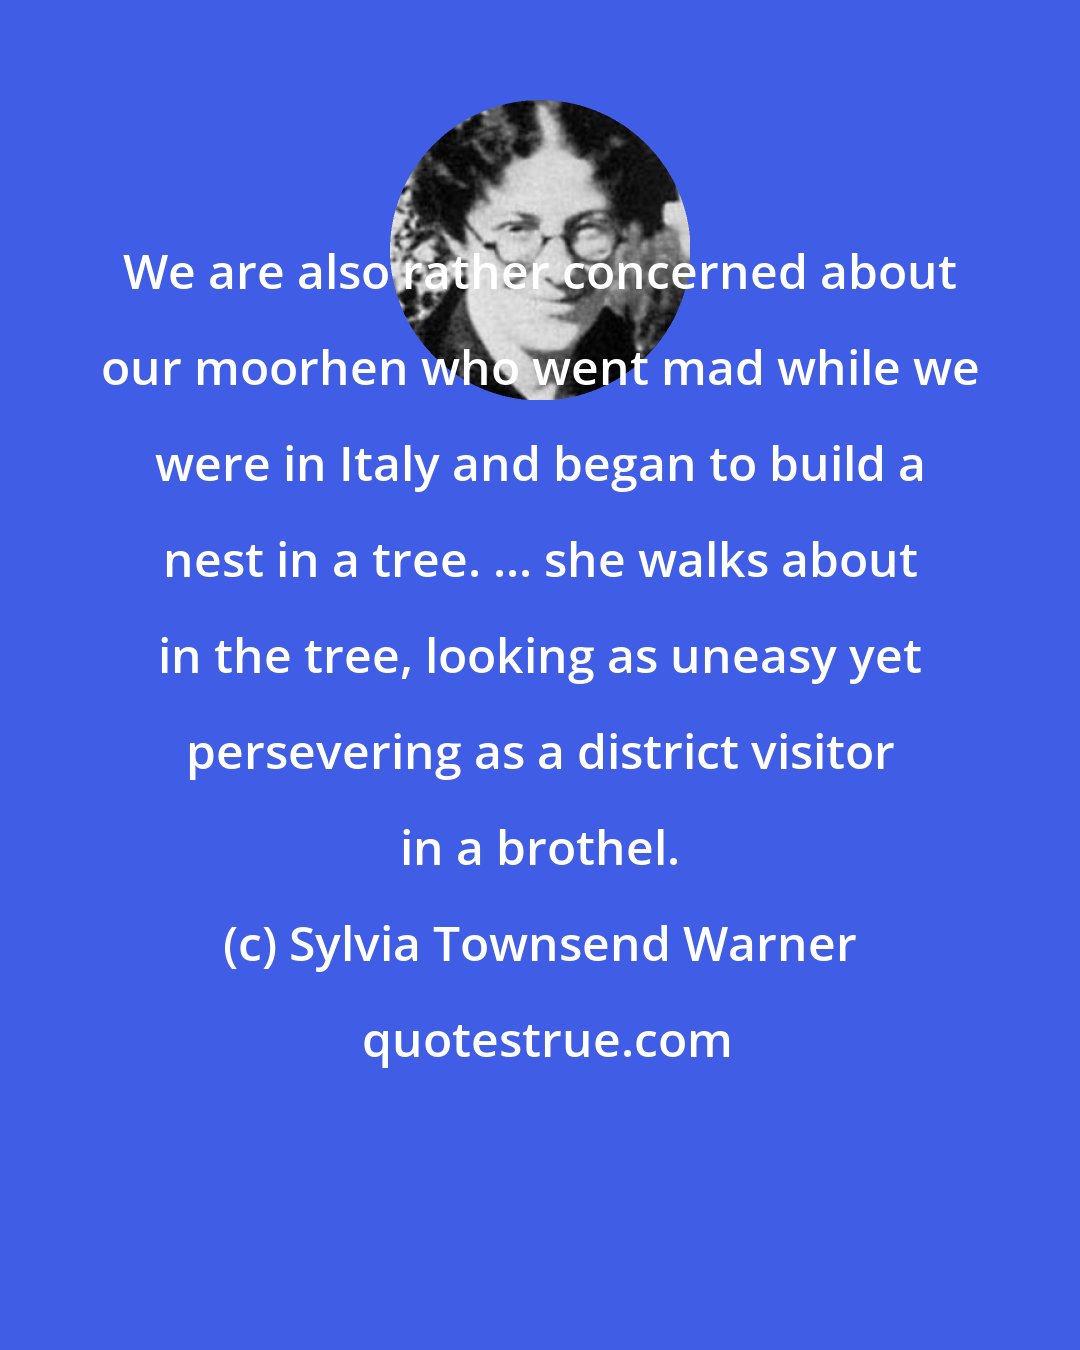 Sylvia Townsend Warner: We are also rather concerned about our moorhen who went mad while we were in Italy and began to build a nest in a tree. ... she walks about in the tree, looking as uneasy yet persevering as a district visitor in a brothel.